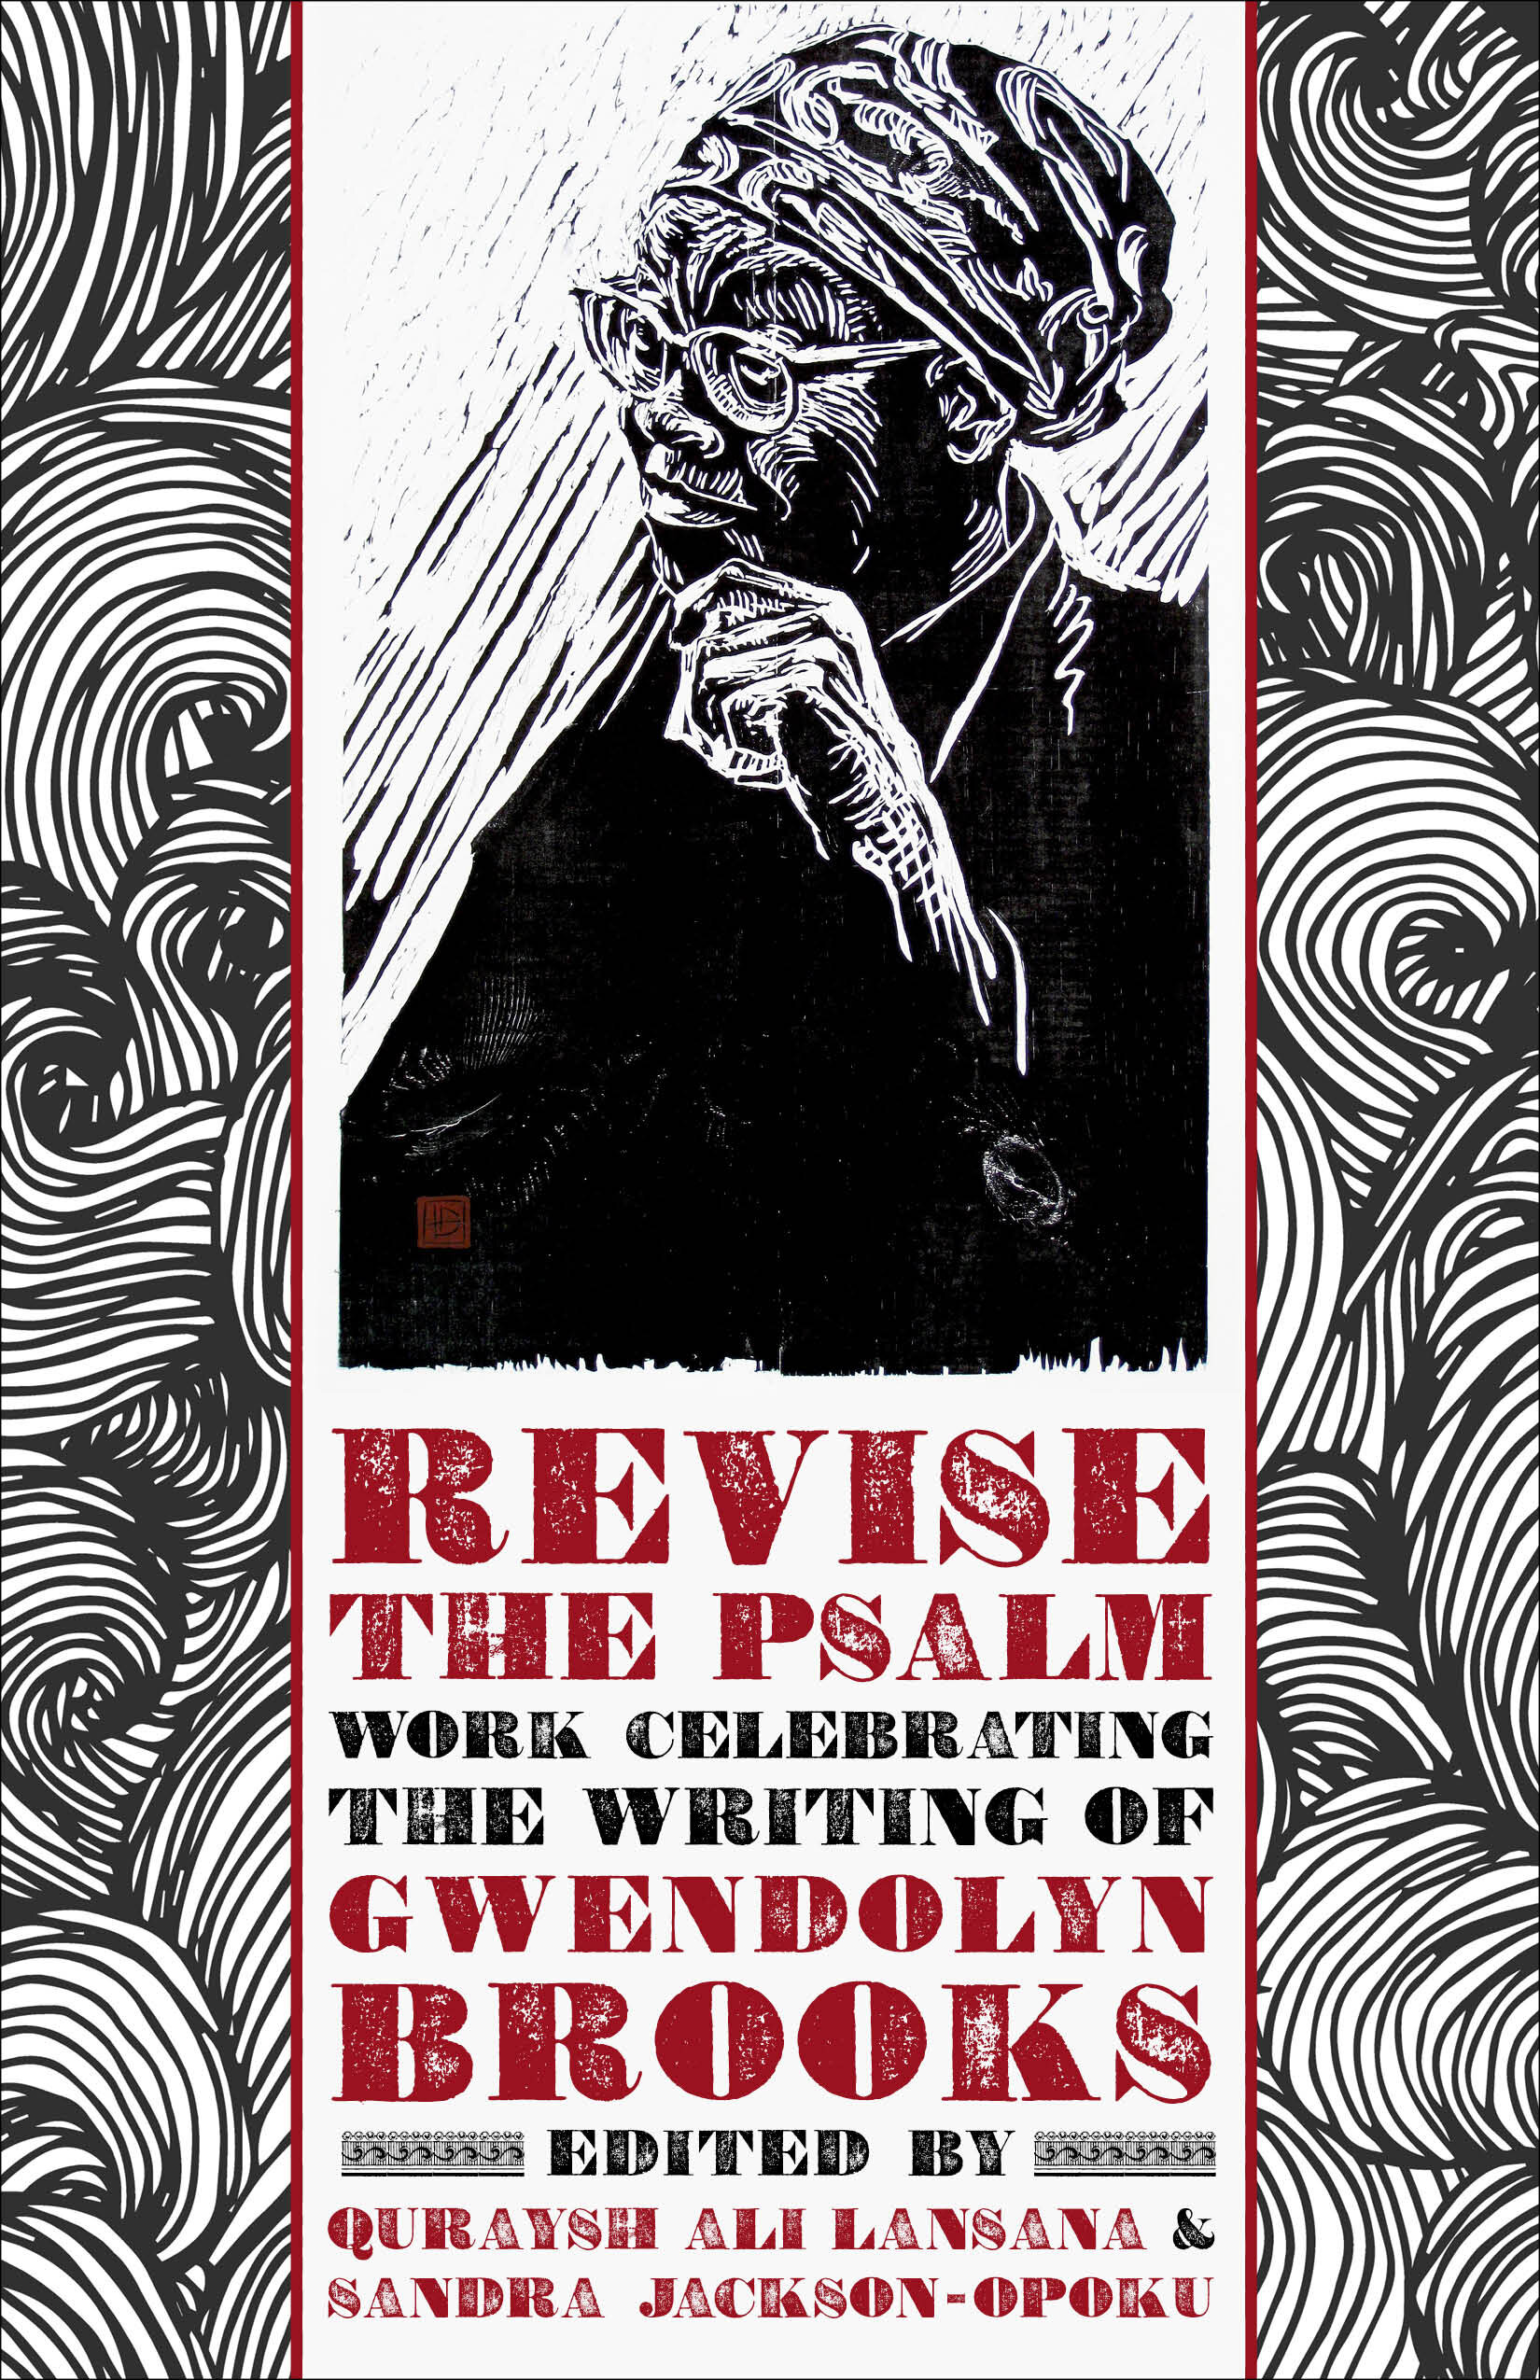 REVISE THE PSALM: WORK CELEBRATING THE WRITING OF GWENDOLYN BROOKS (Curbside Splendor, 2017)